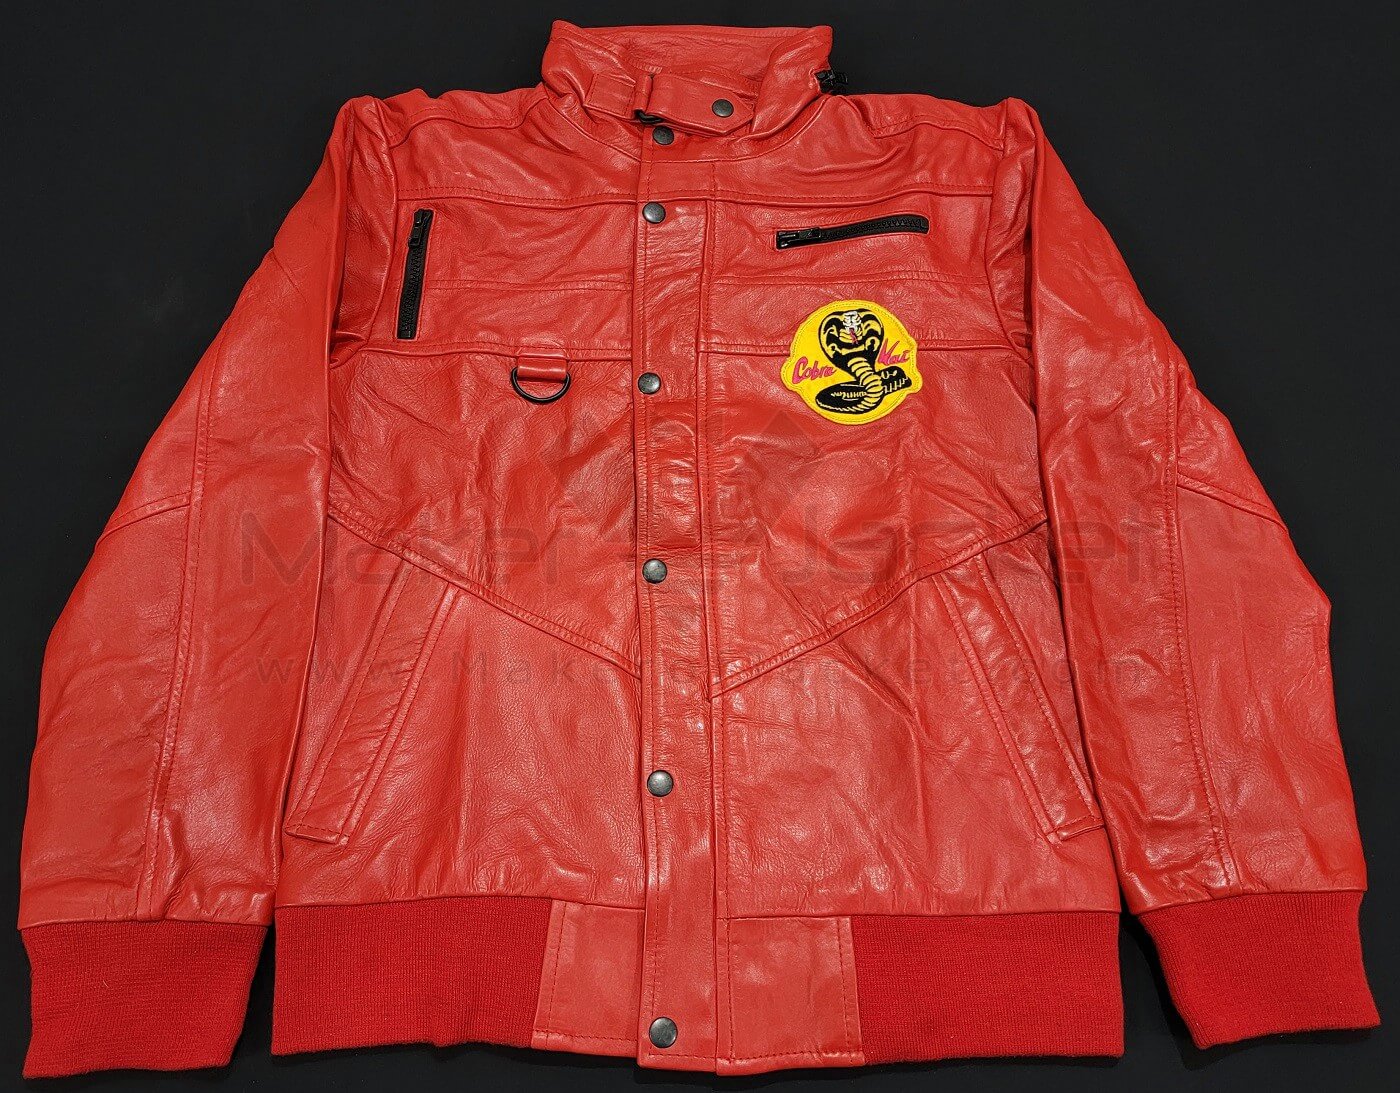 Cobra Kai OFFICIAL Johnny Lawrence Red Leather Jacket SPECIAL